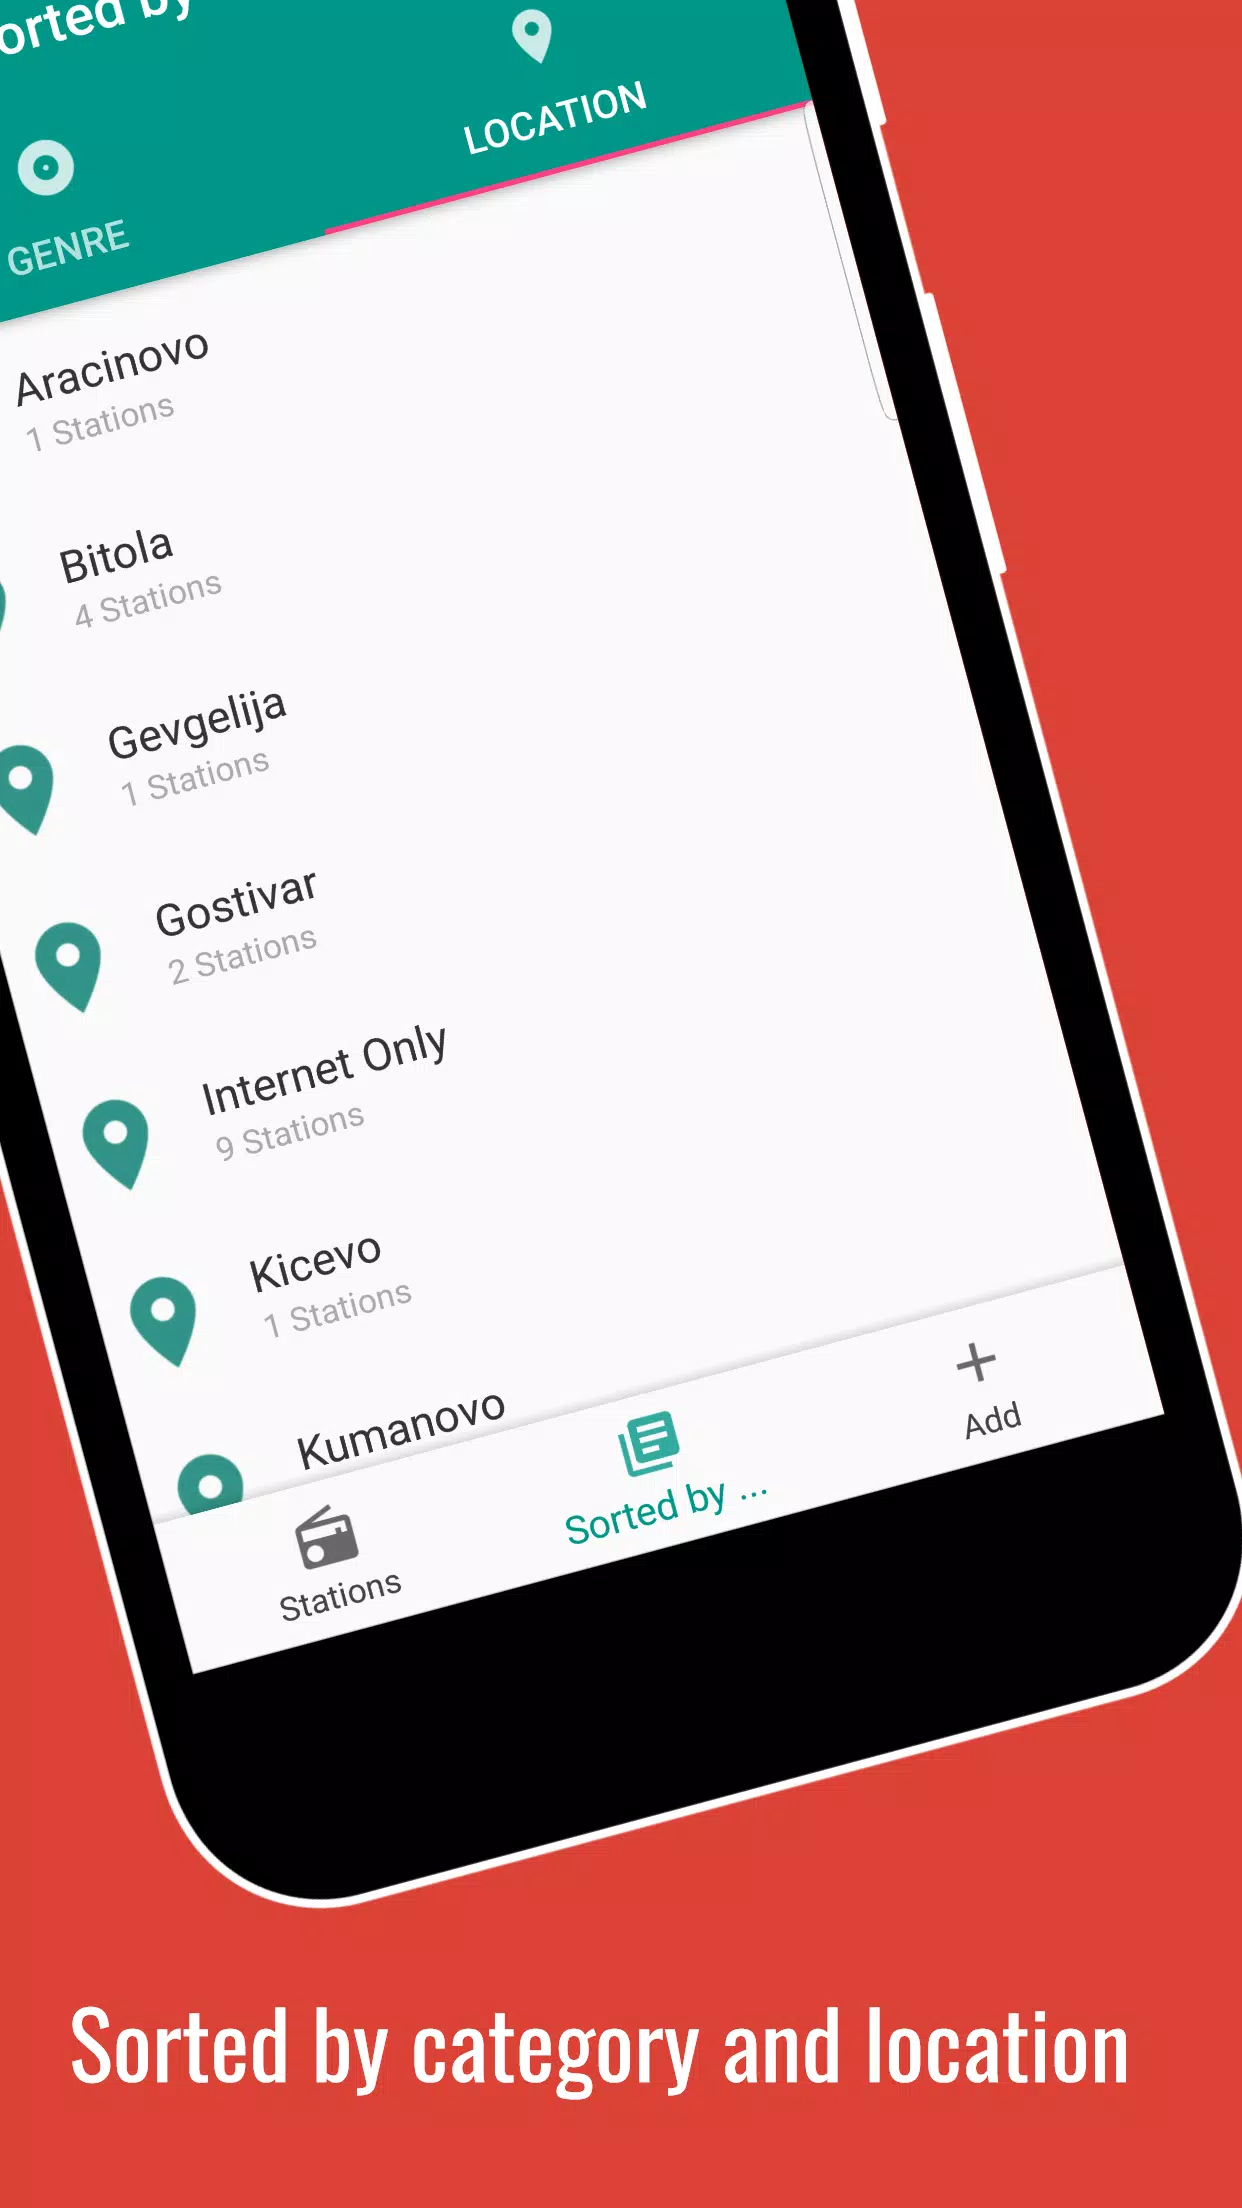 Radio Macedonia APK for Android Download